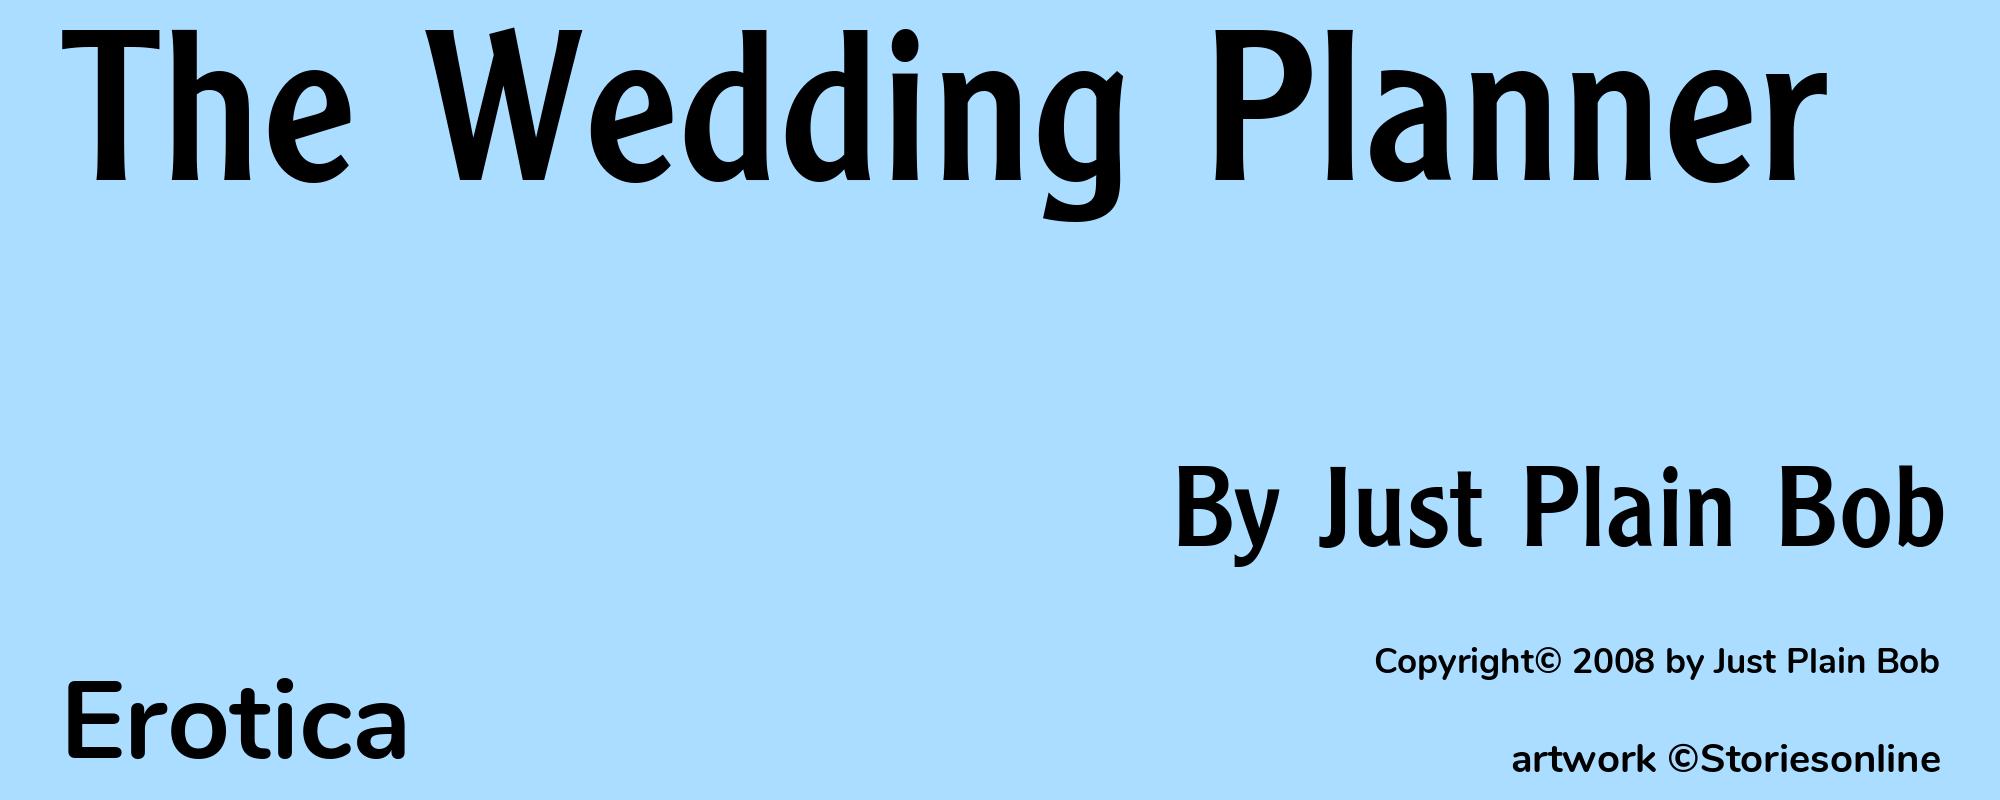 The Wedding Planner - Cover